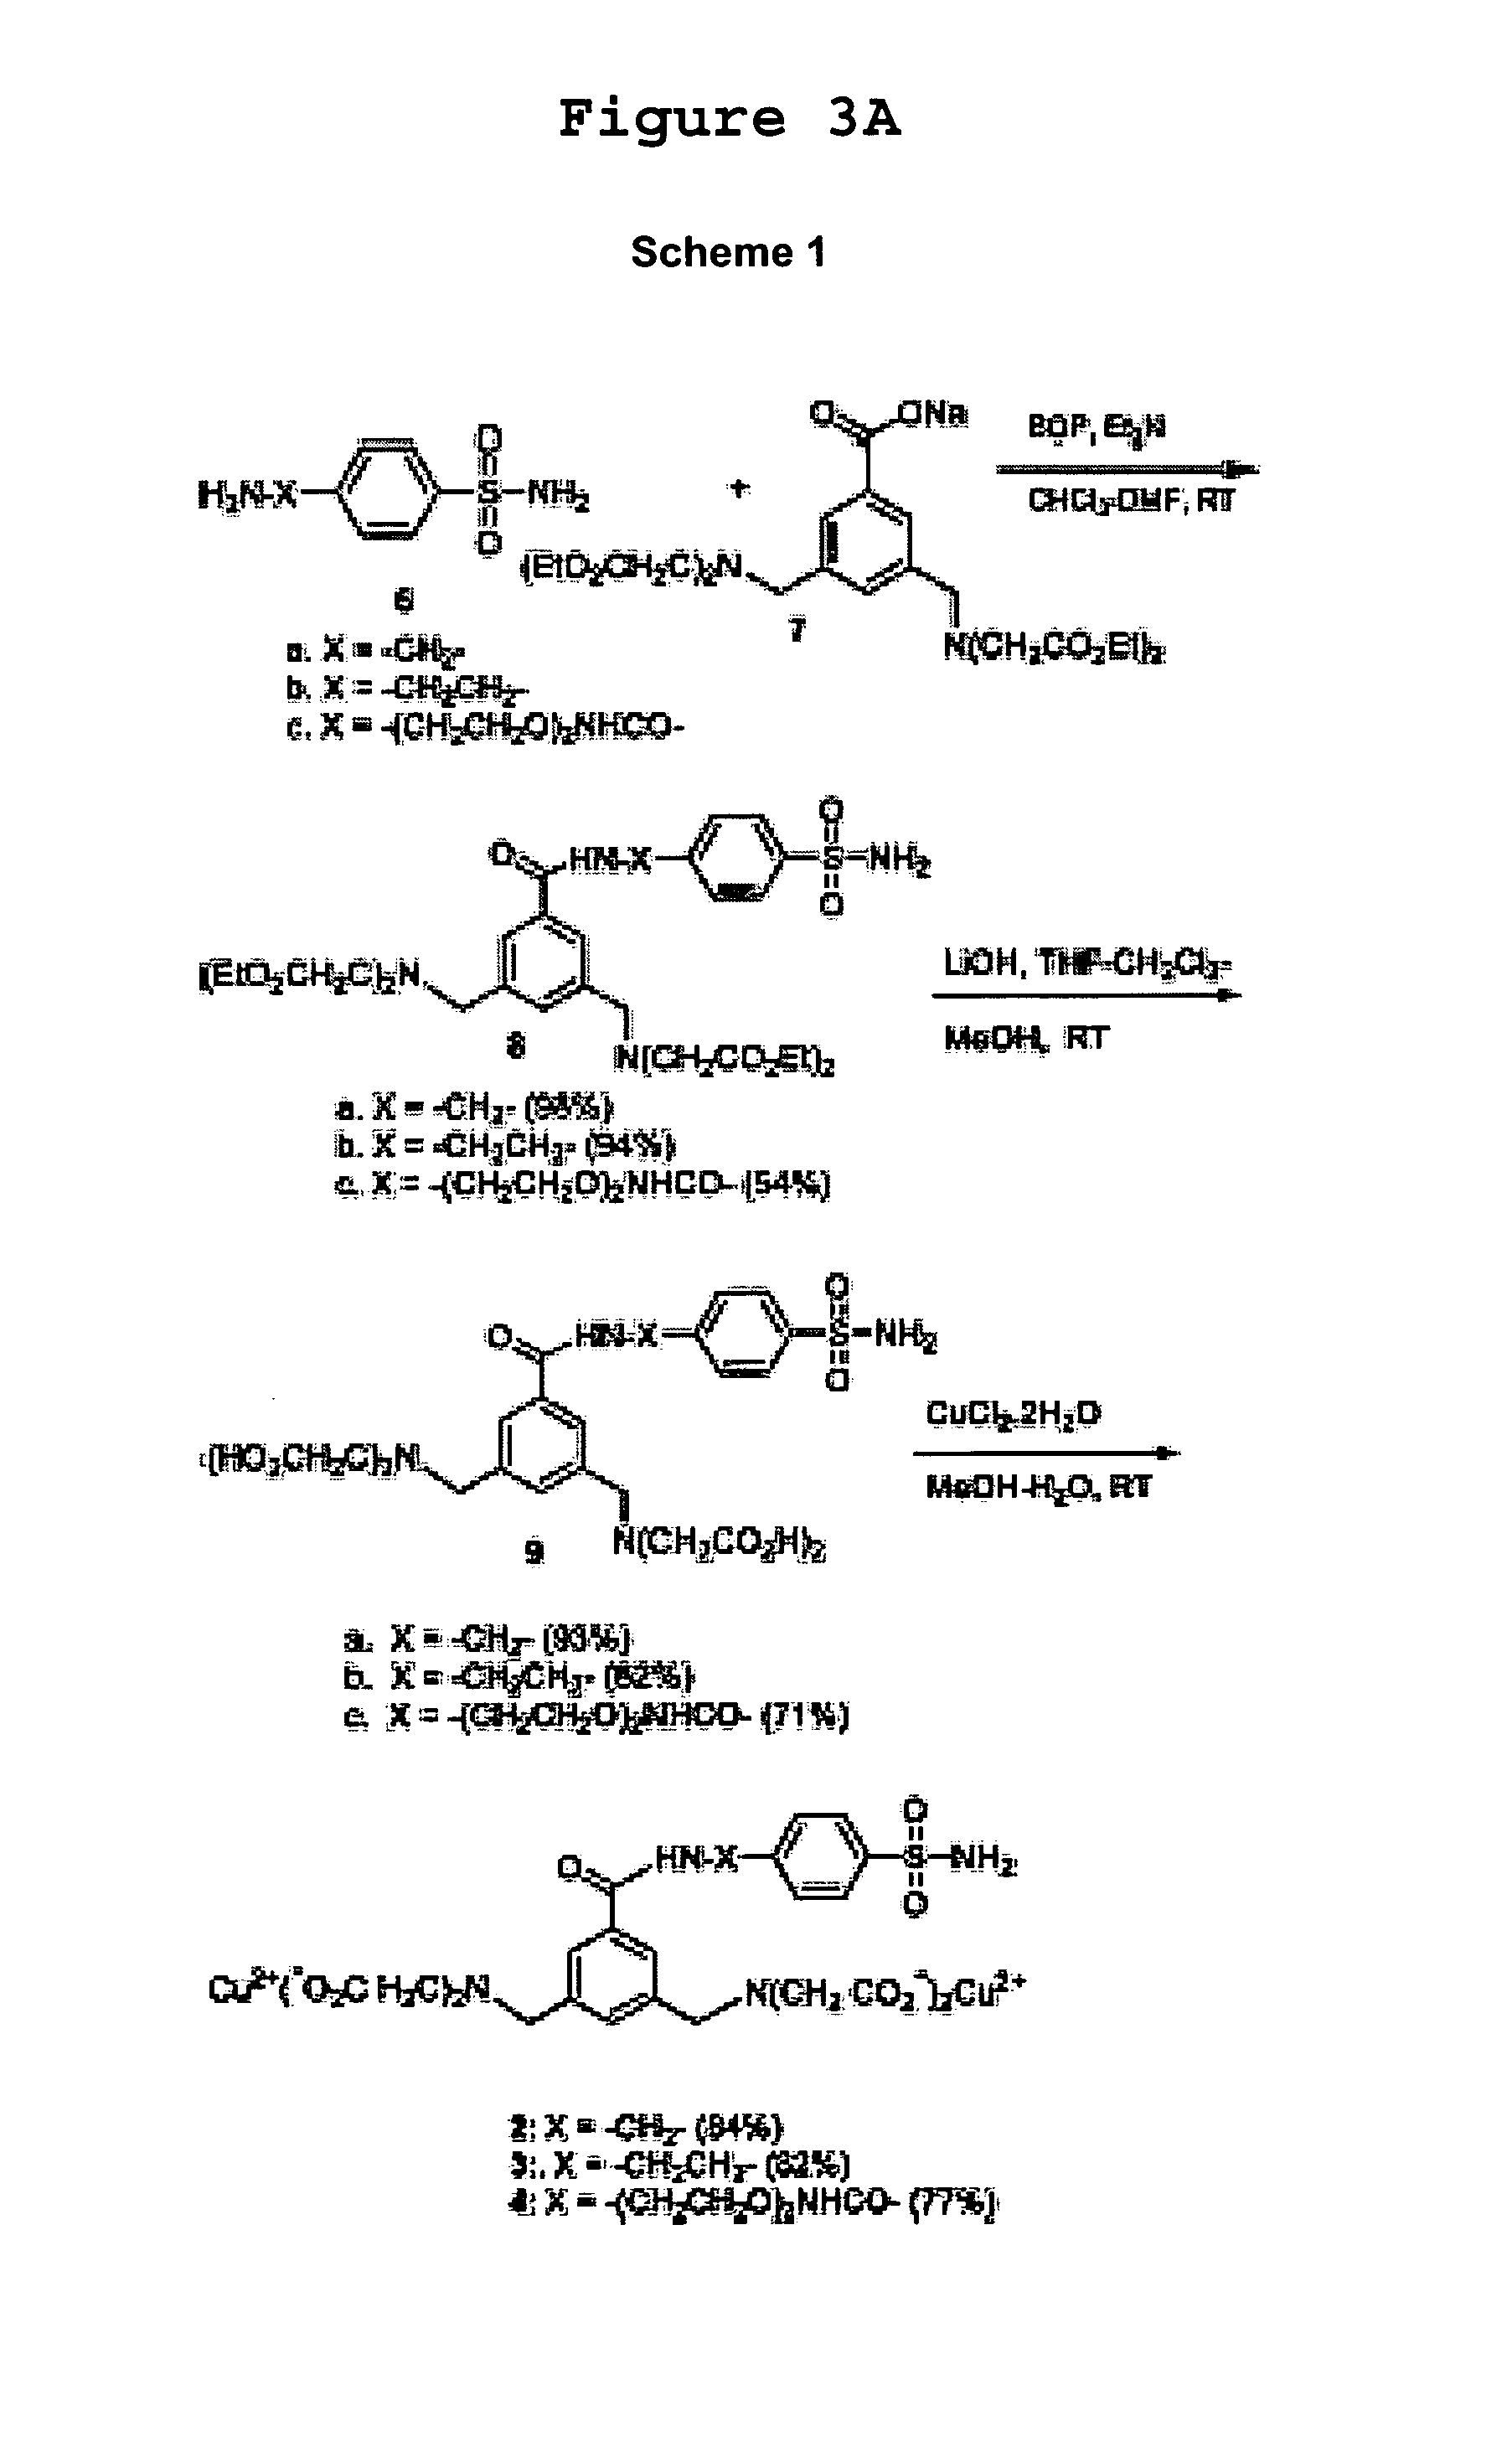 Methods and materials for enhancing the effects of protein modulators